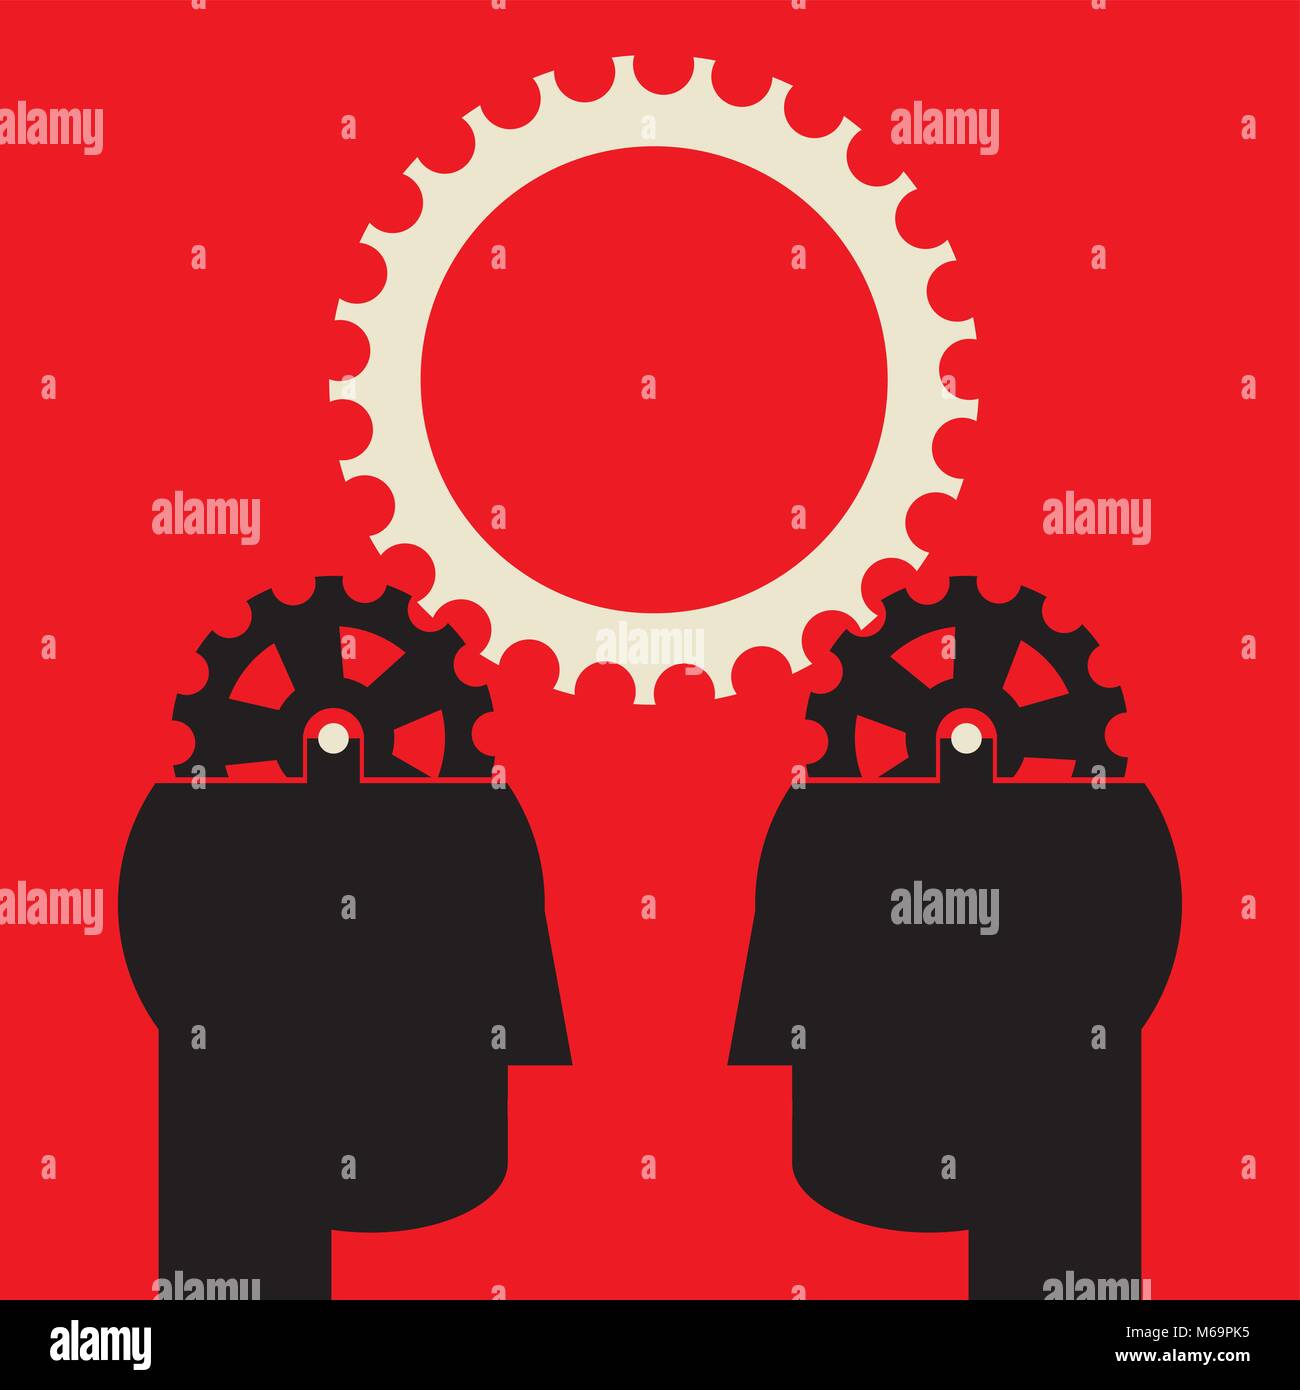 driving gear connecting two people to create a new bright idea Stock Vector